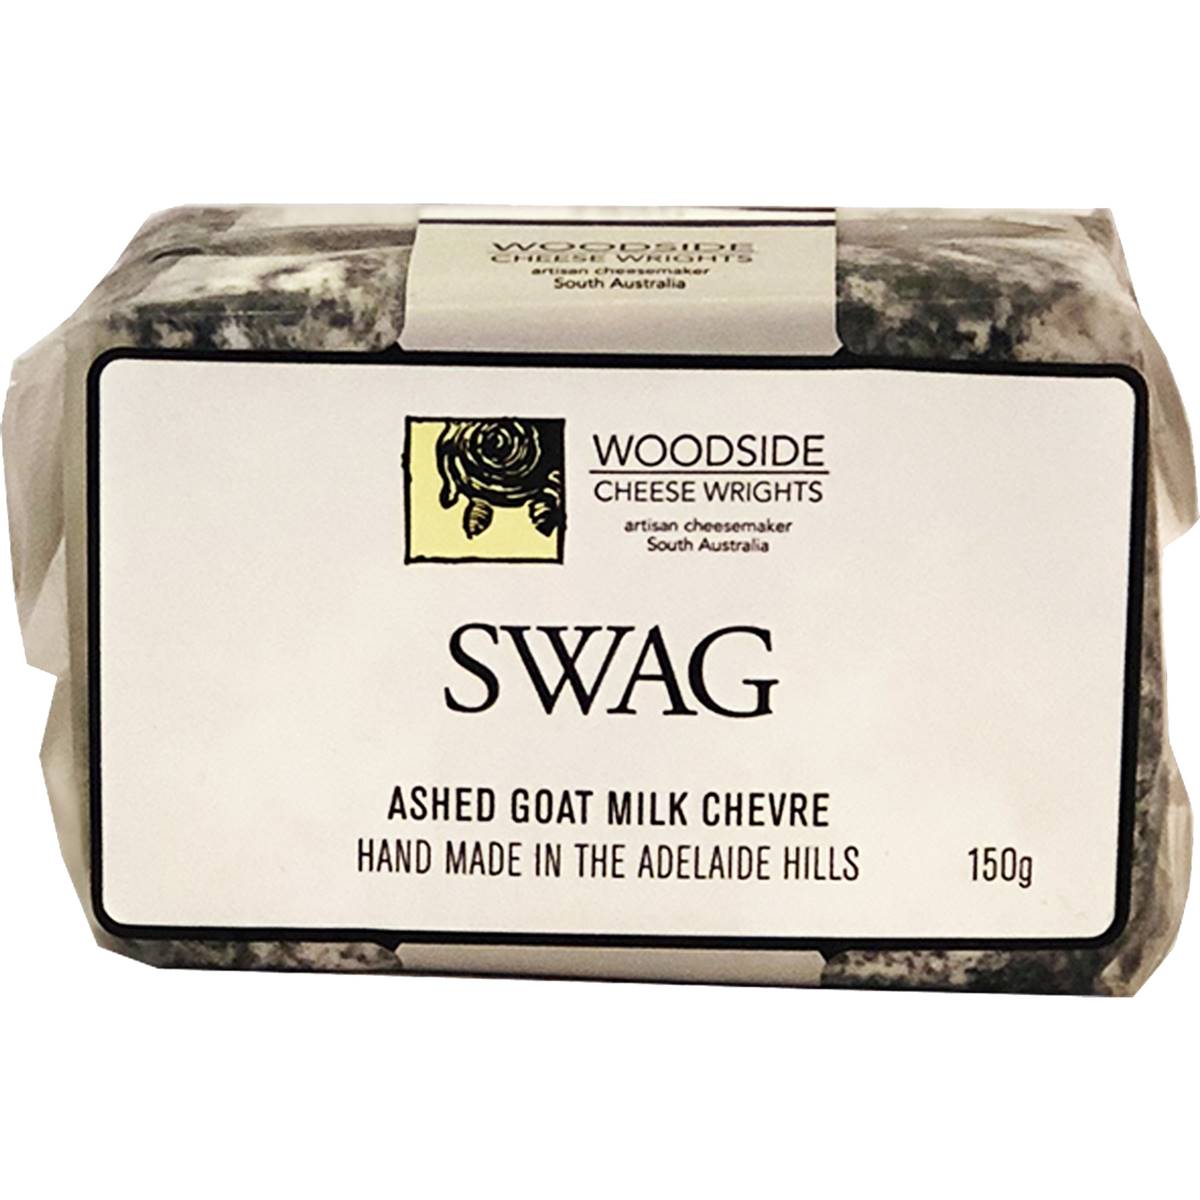 Woodside Cheese Wrights Swag Goat Chevre 150g 6ct